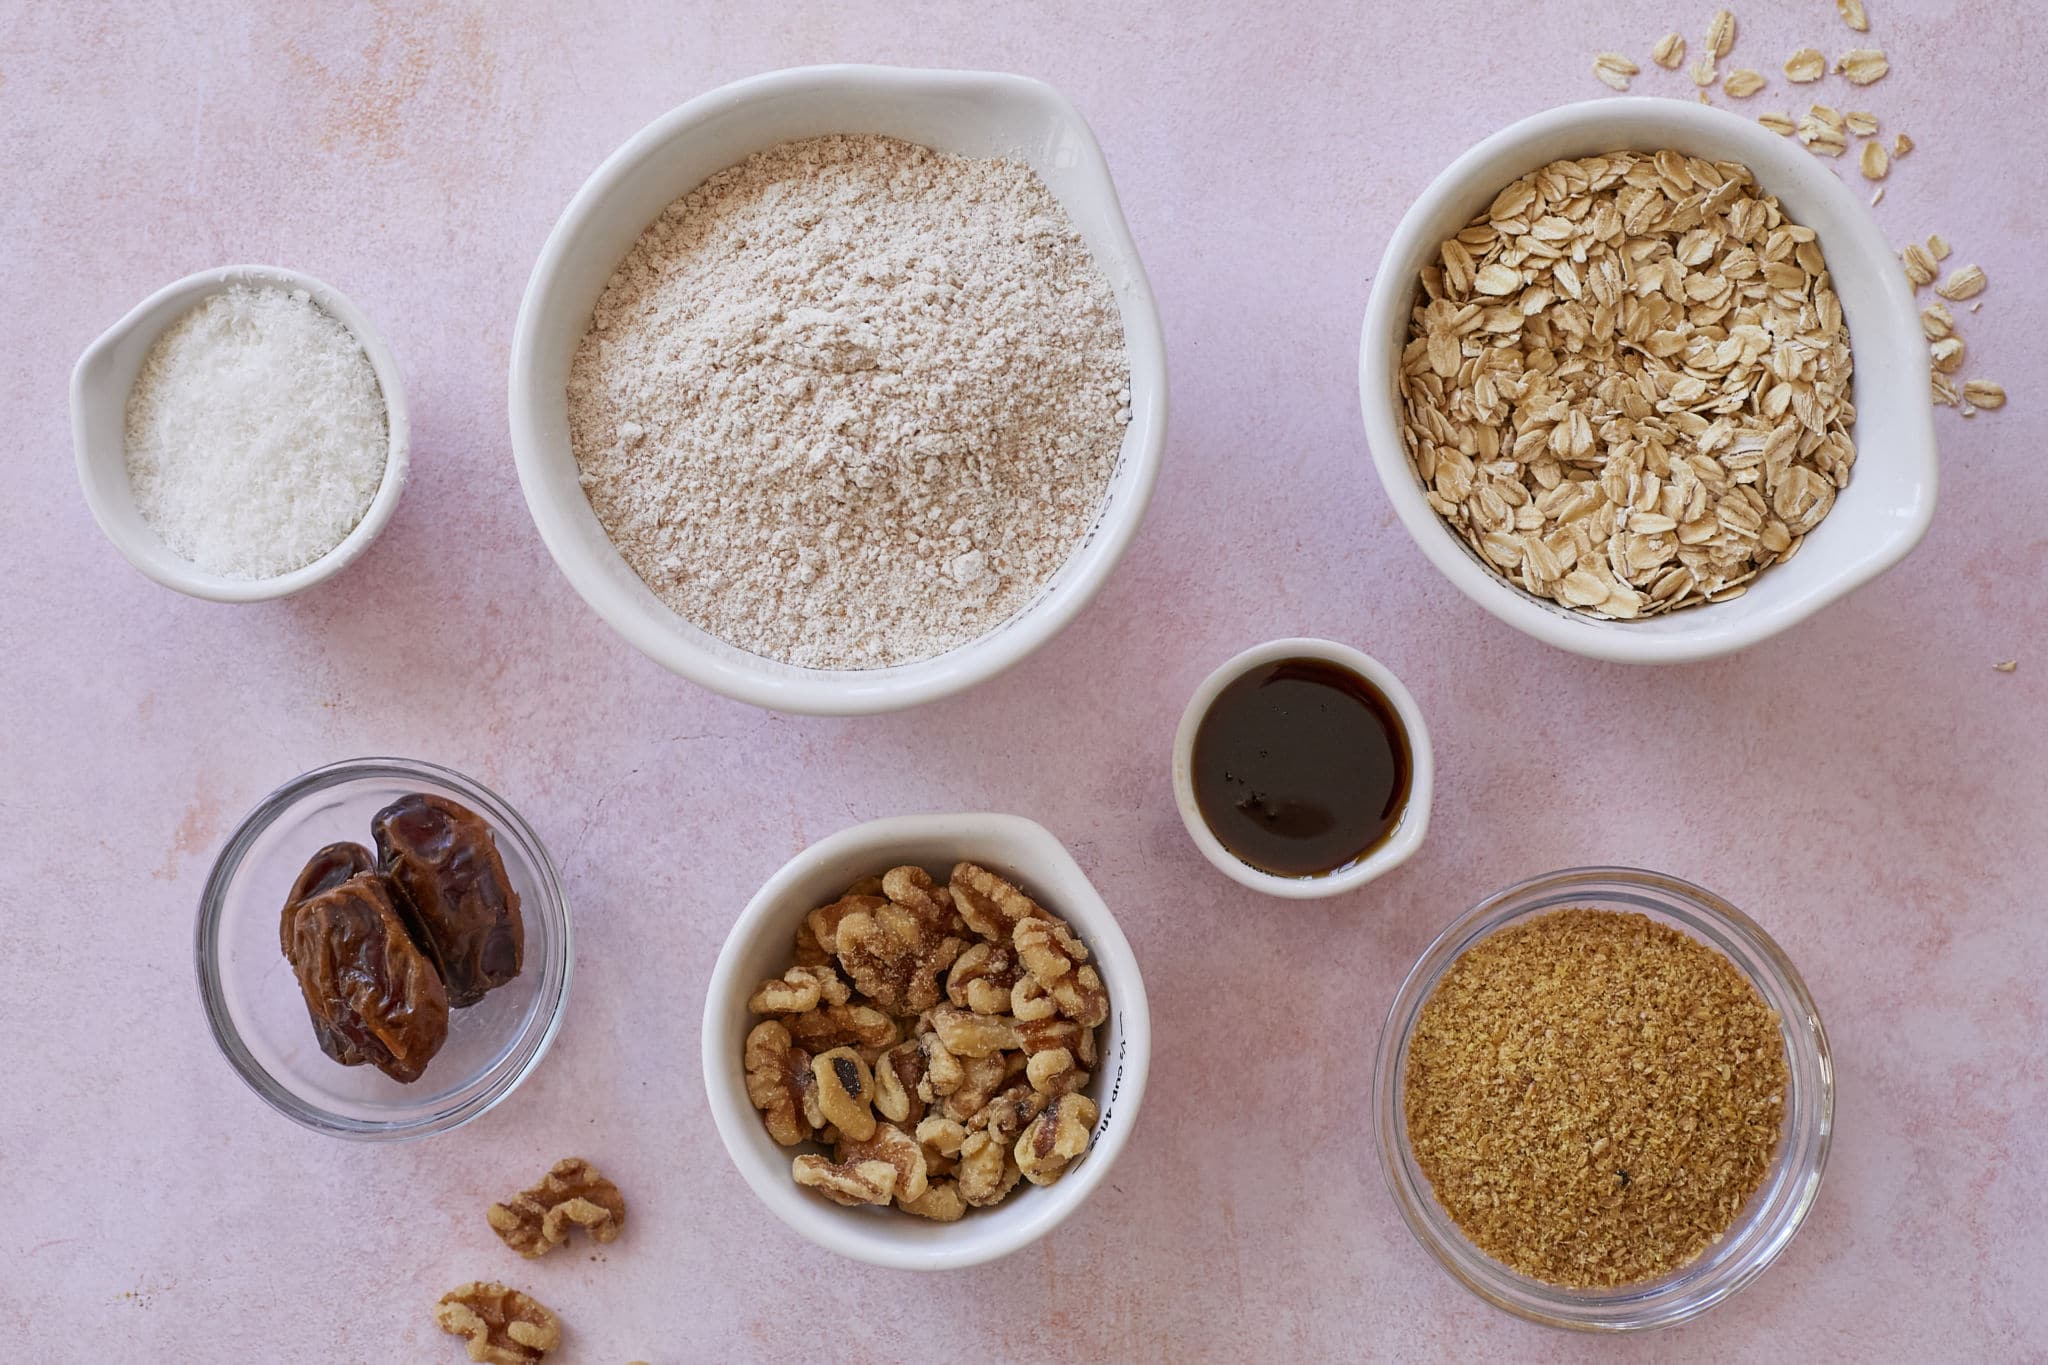 Healthy baking ingredients are displayed on a table, including dates, oats, and almond flour.